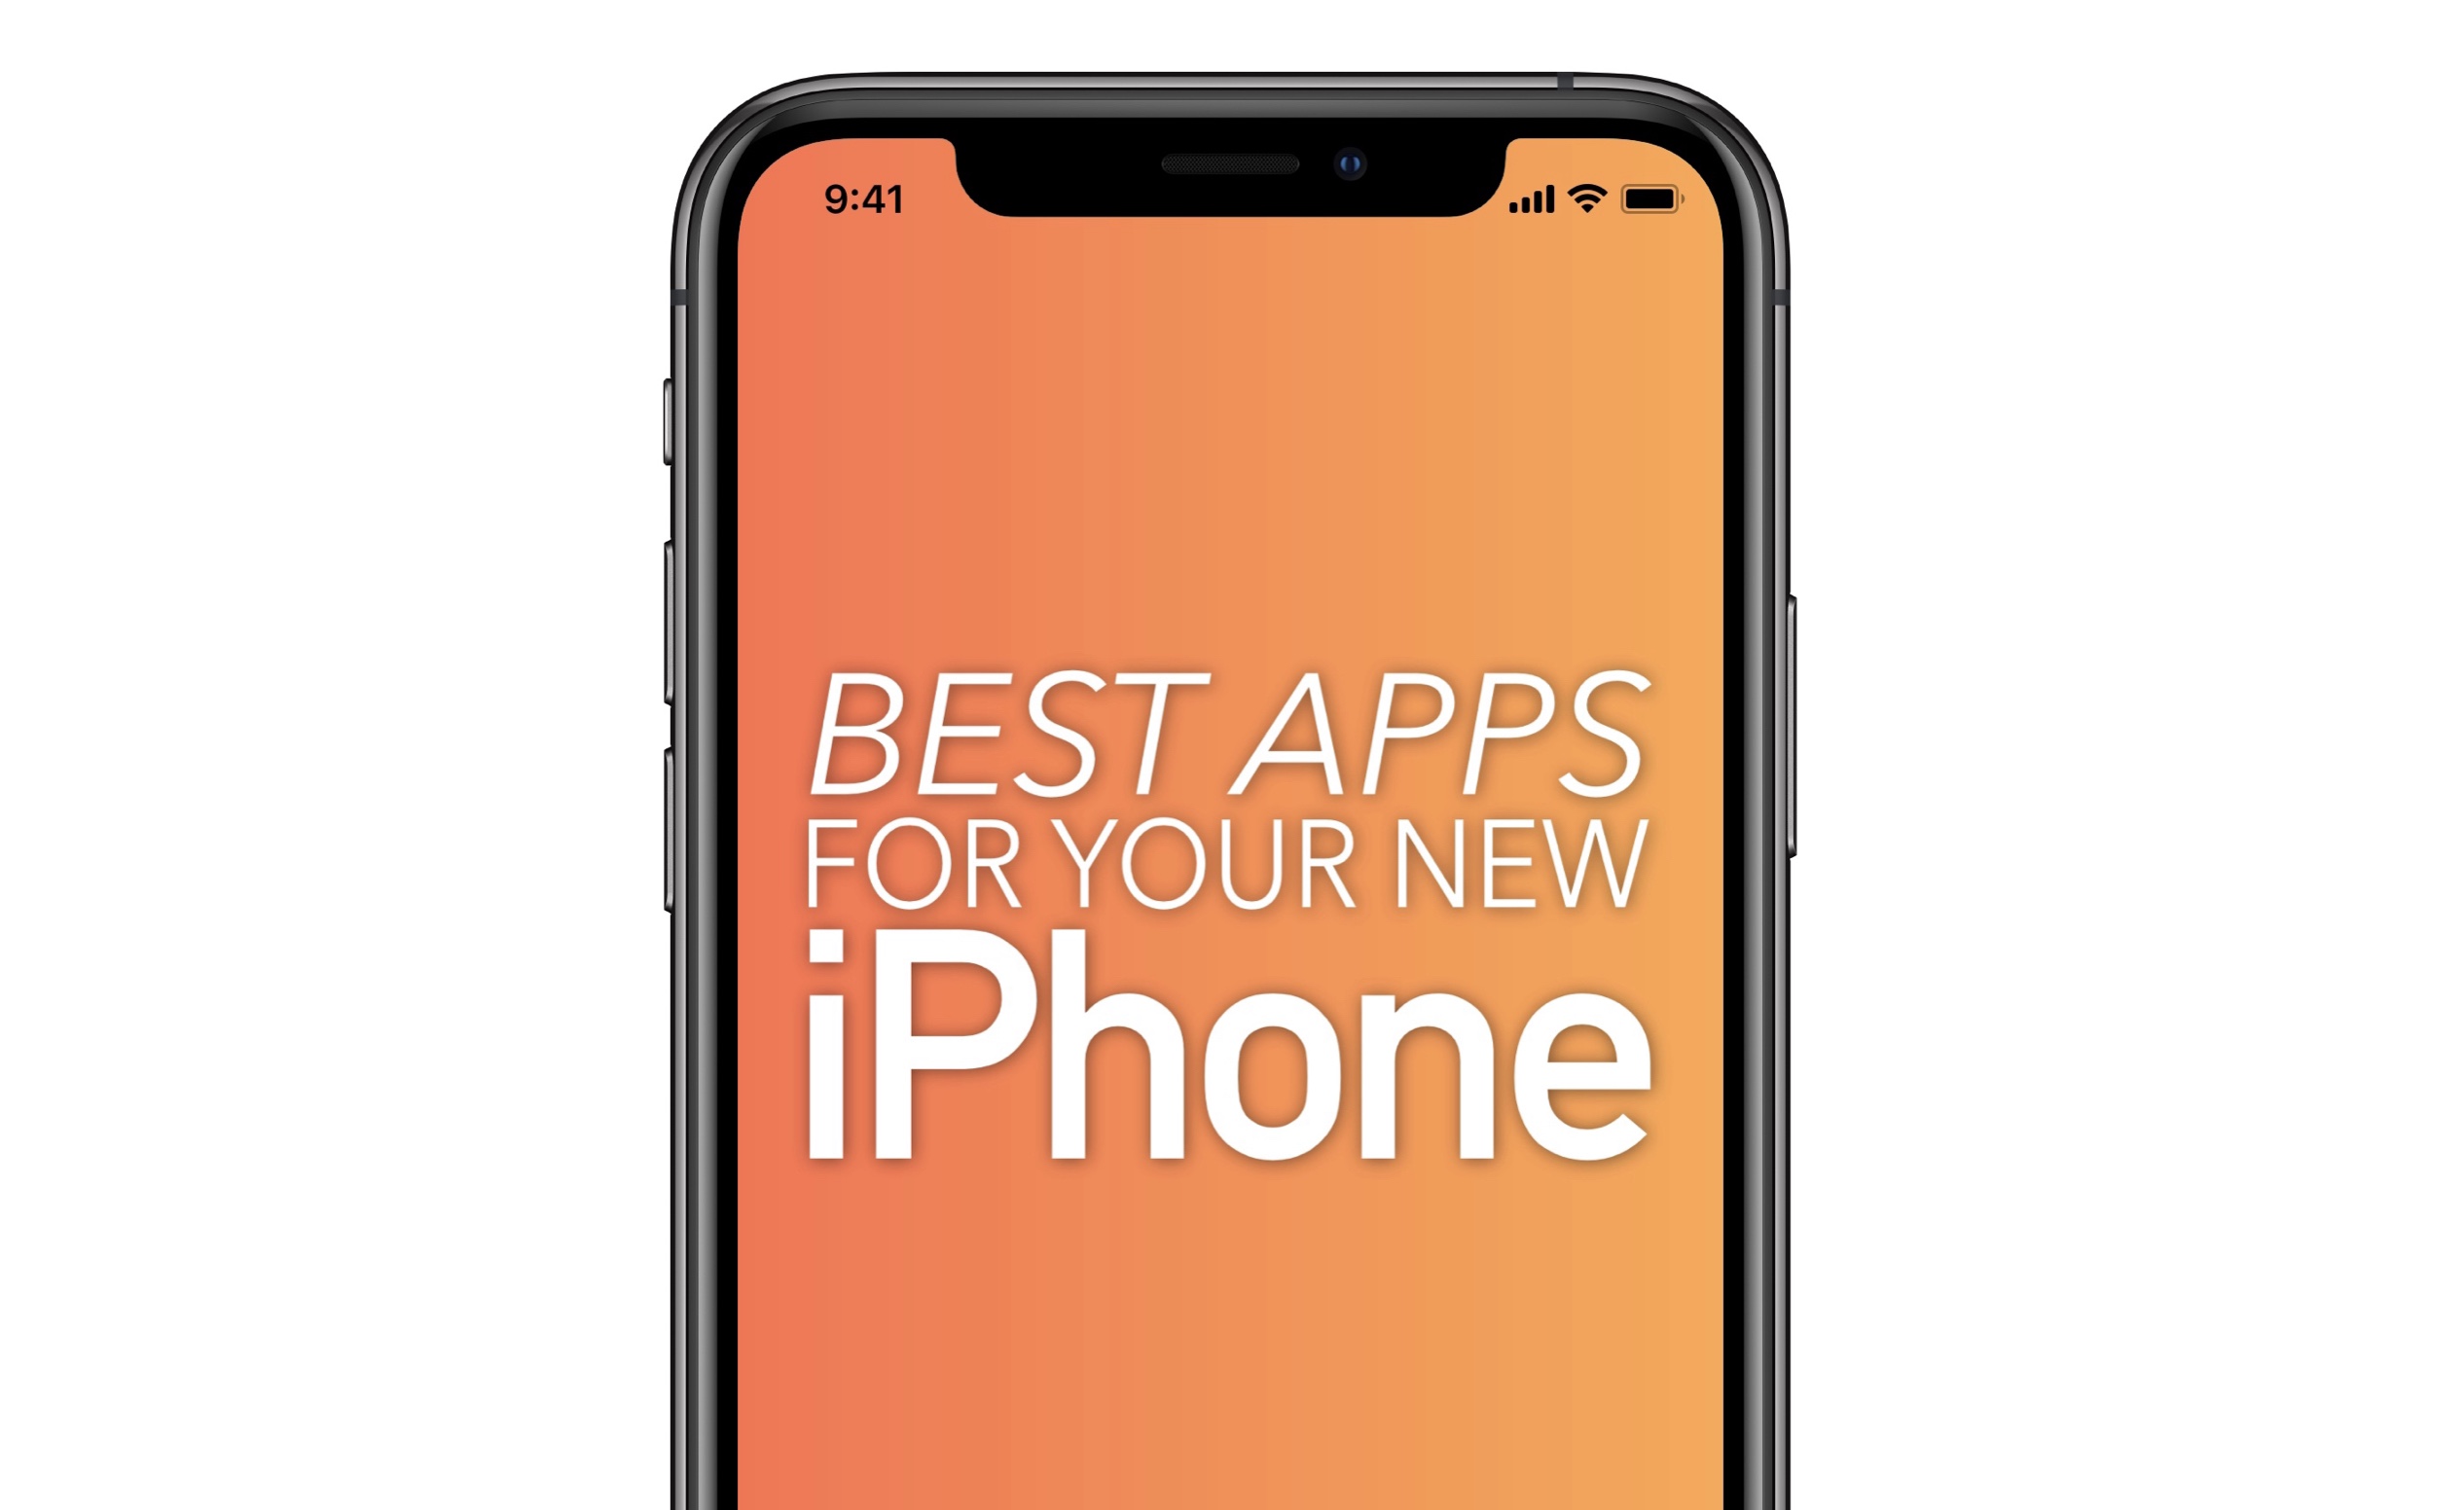 Best apps for your new iPhone